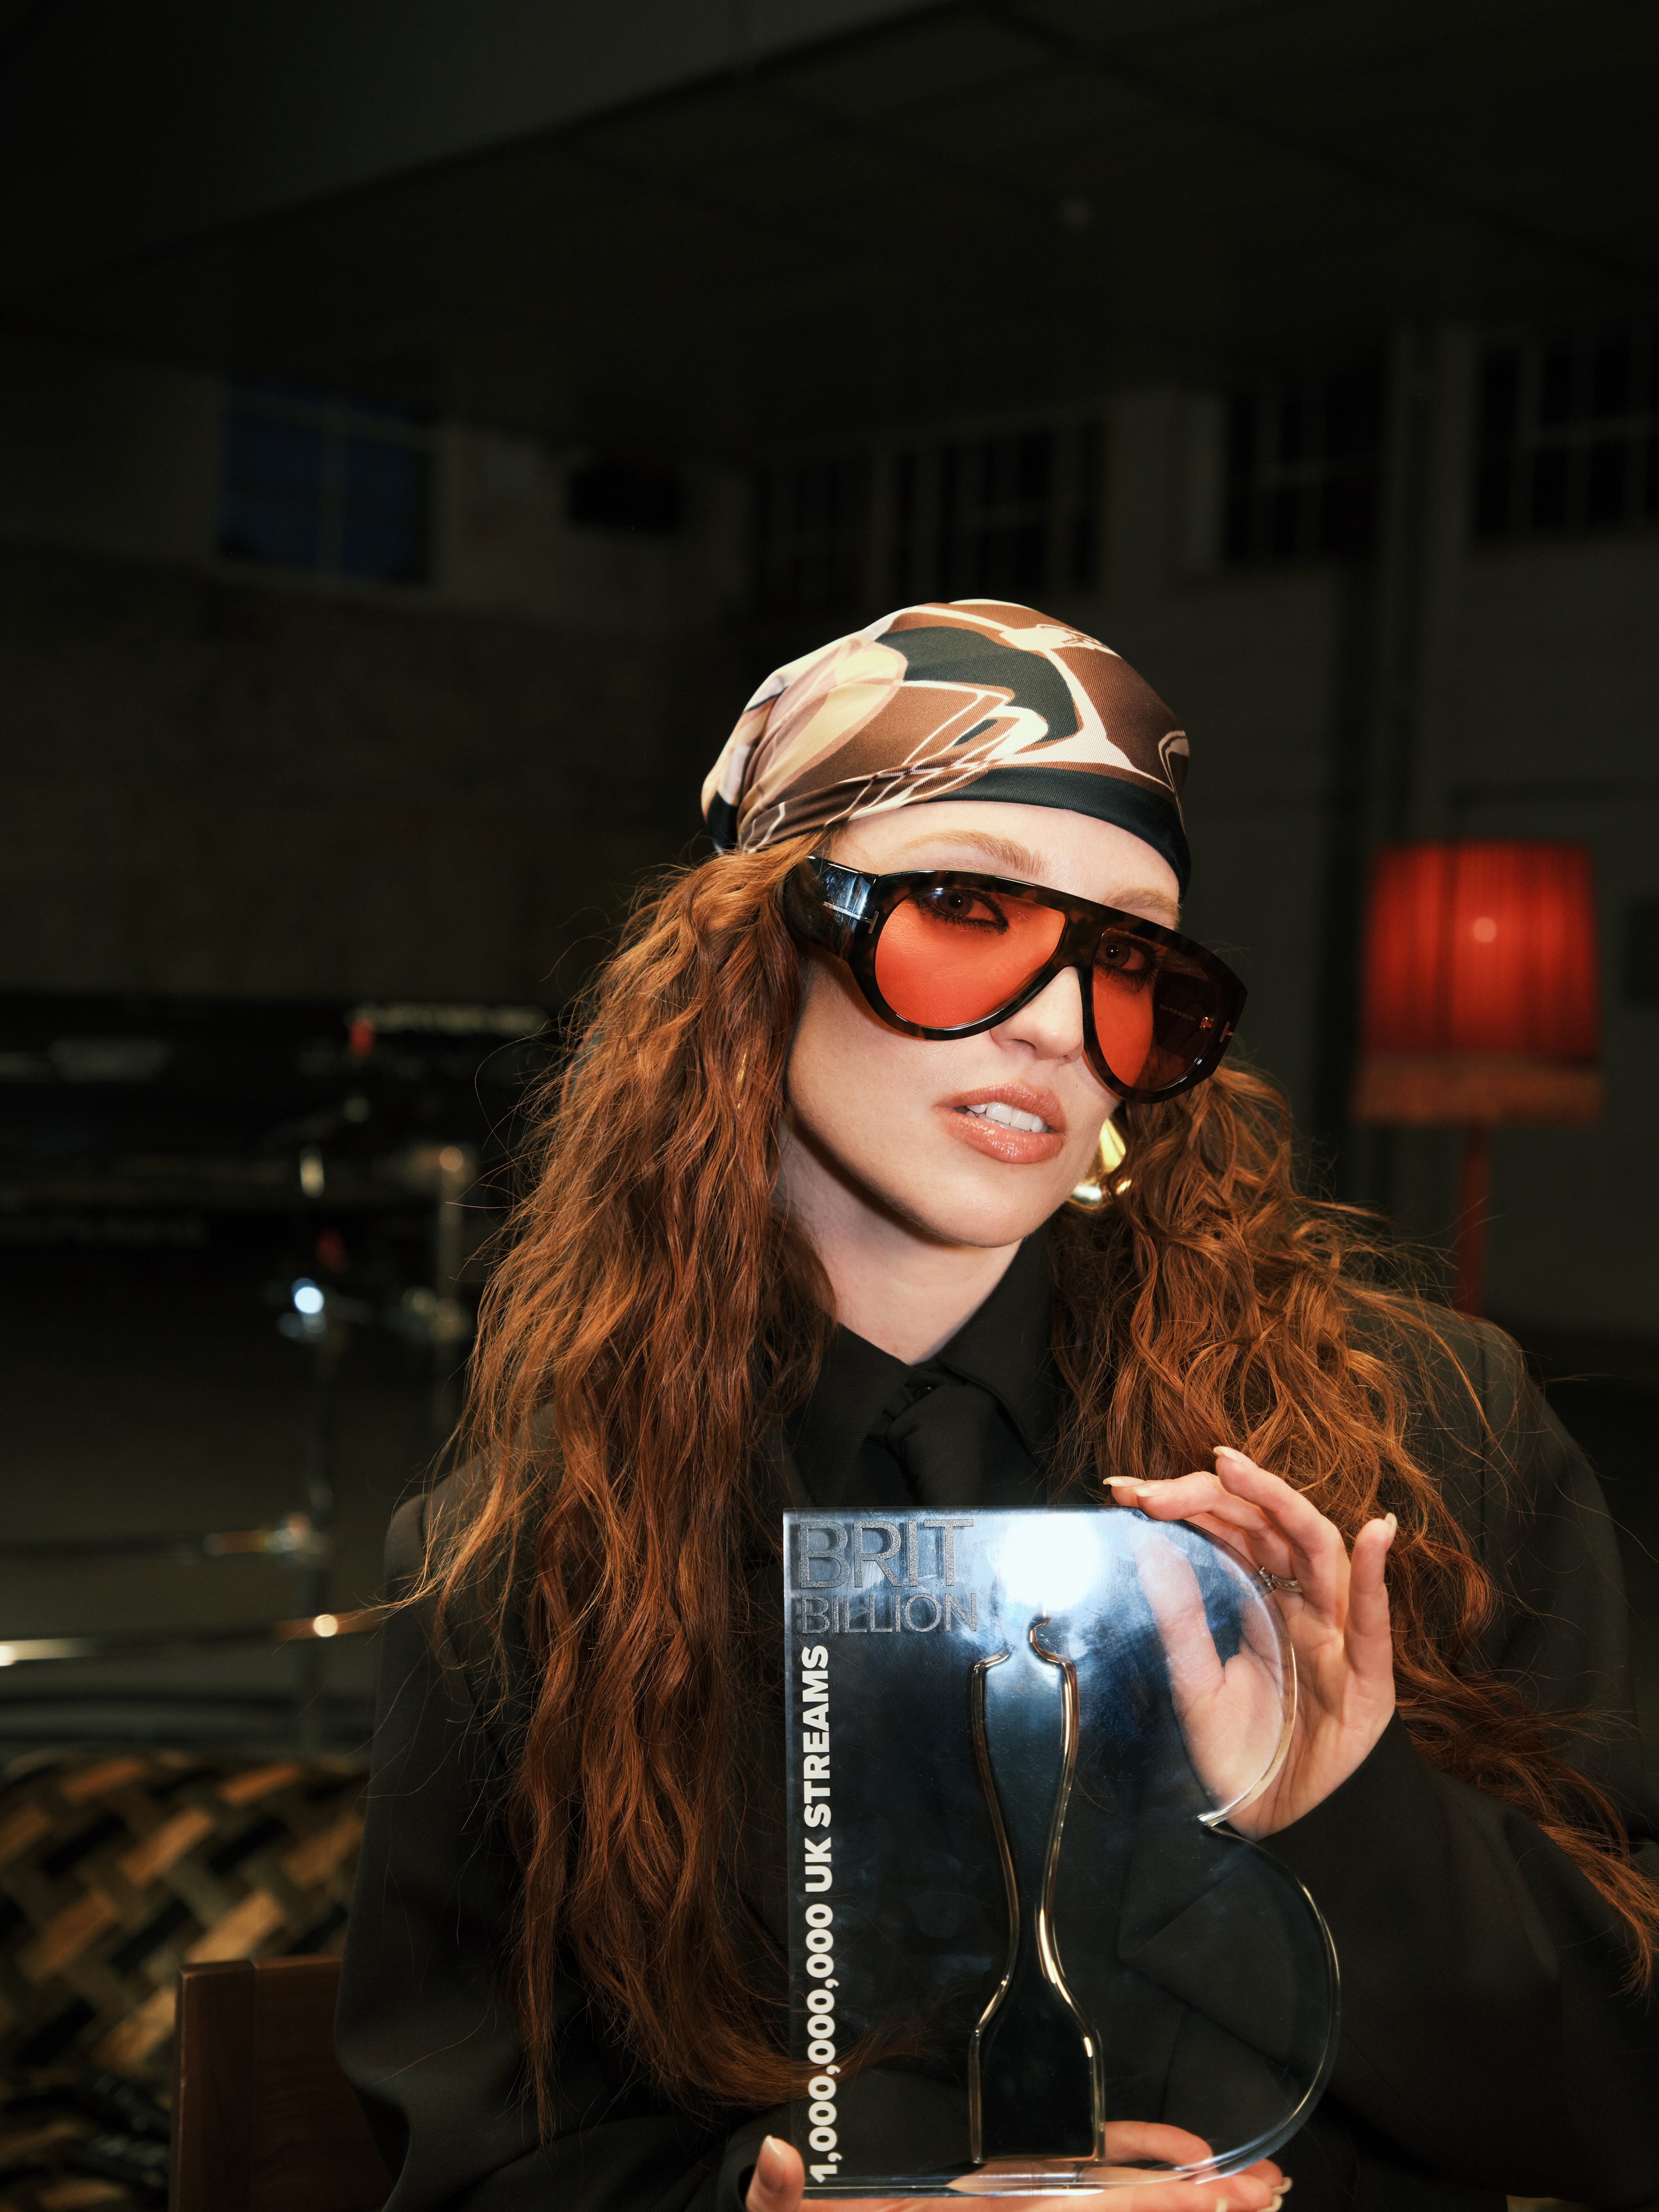 Jess Glynne has become the latest artist to receive a BRIT Billion Award 